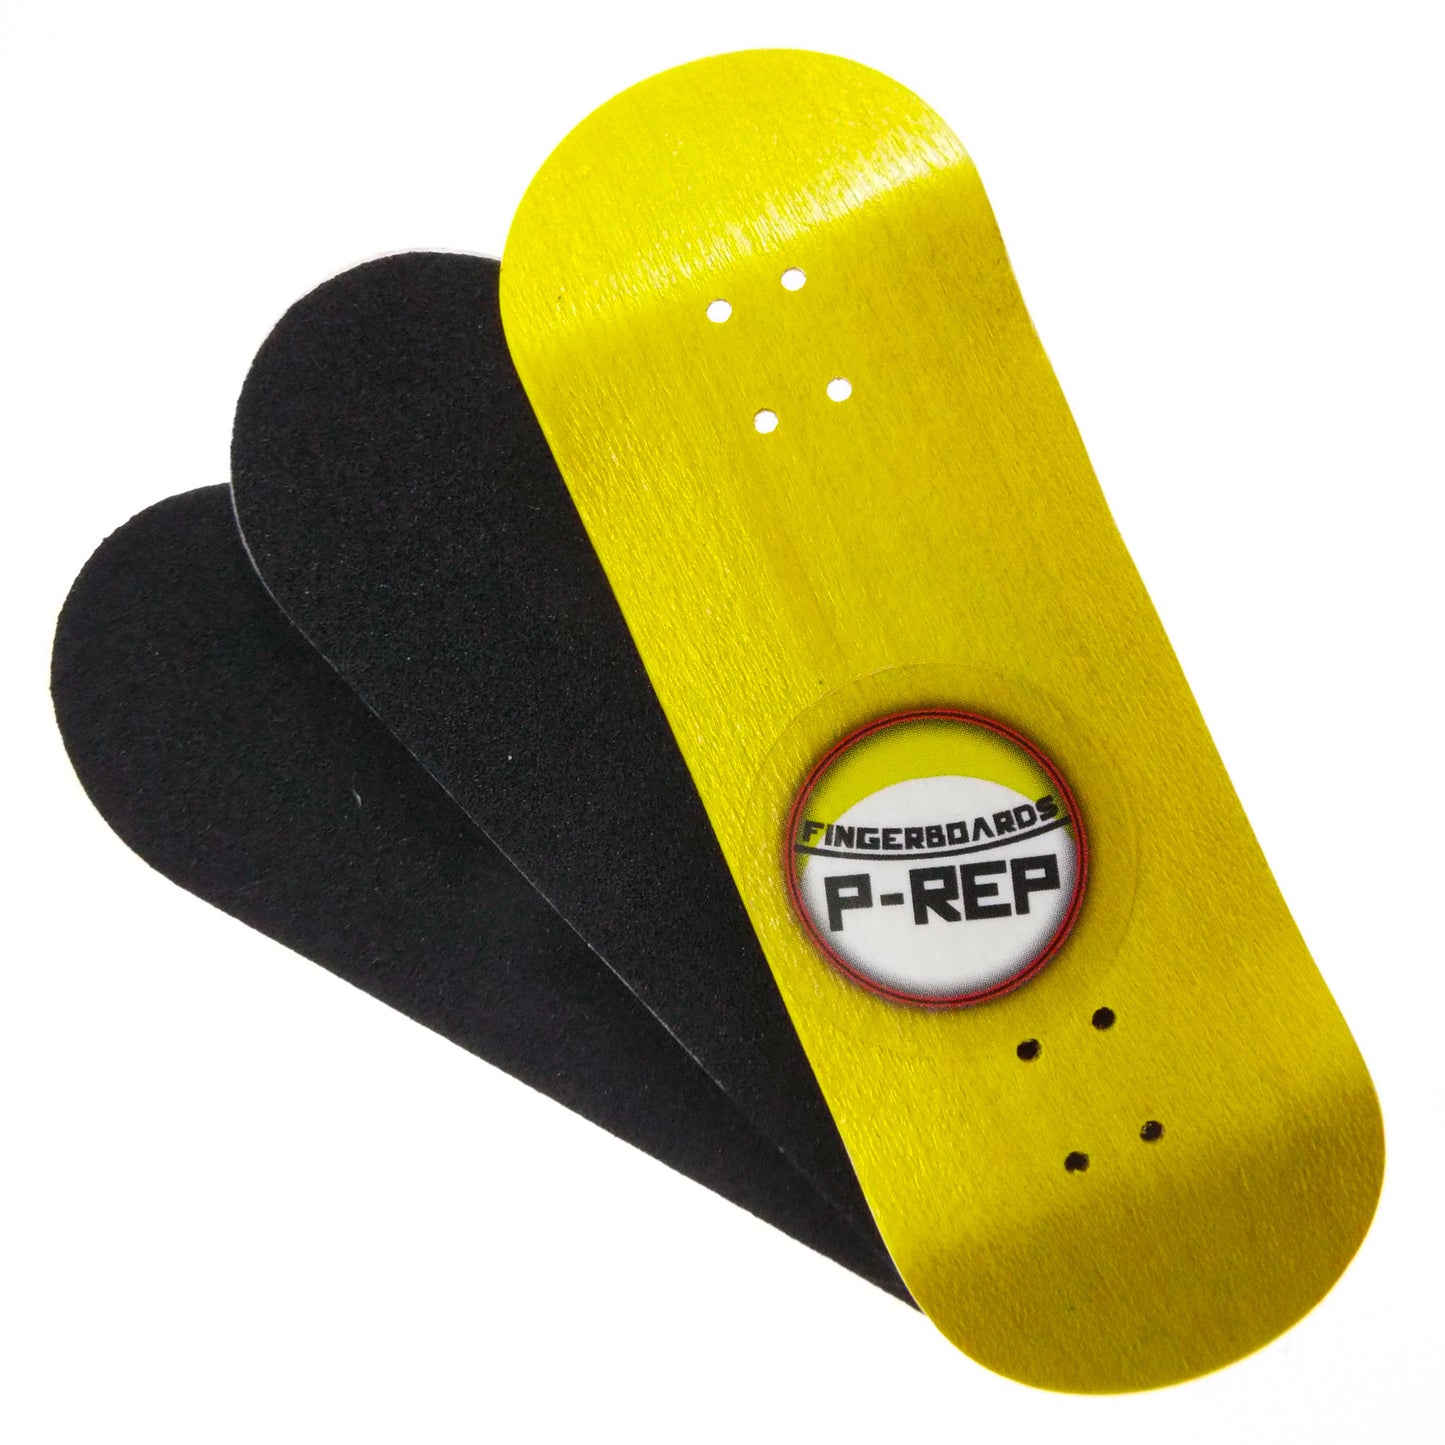 P-REP  32mm x 97mm V2 Performance Complete - Yellow